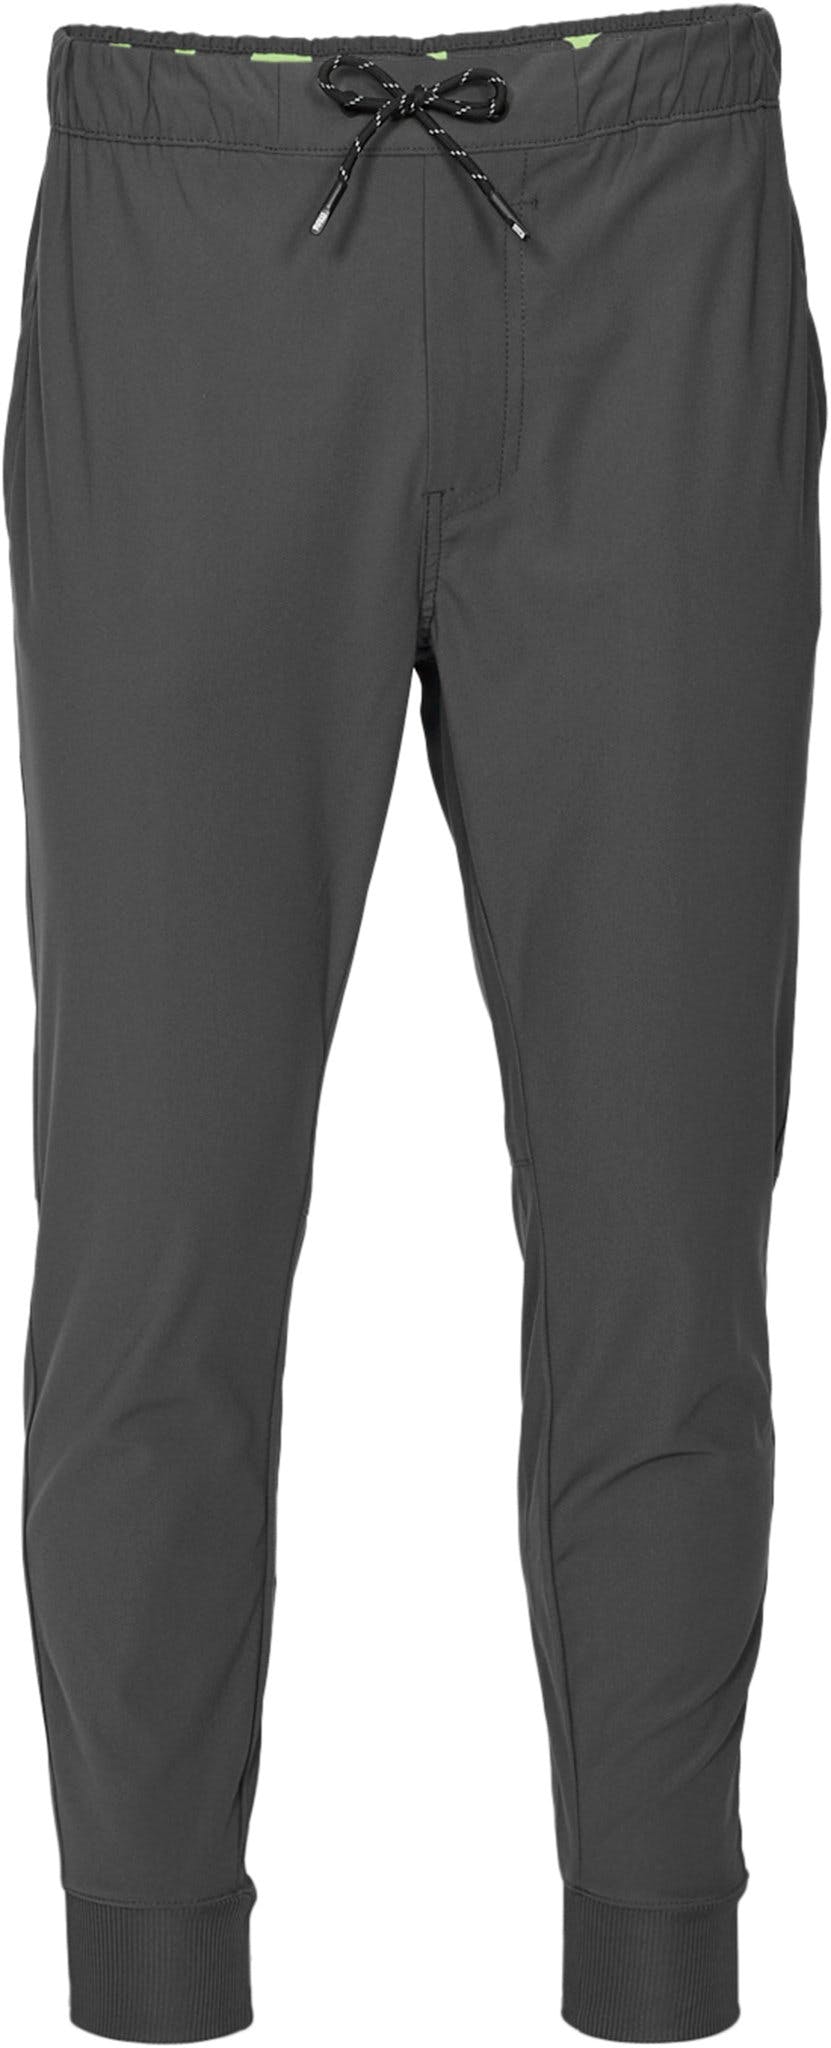 Product image for Active Jogger Pant - Men’s